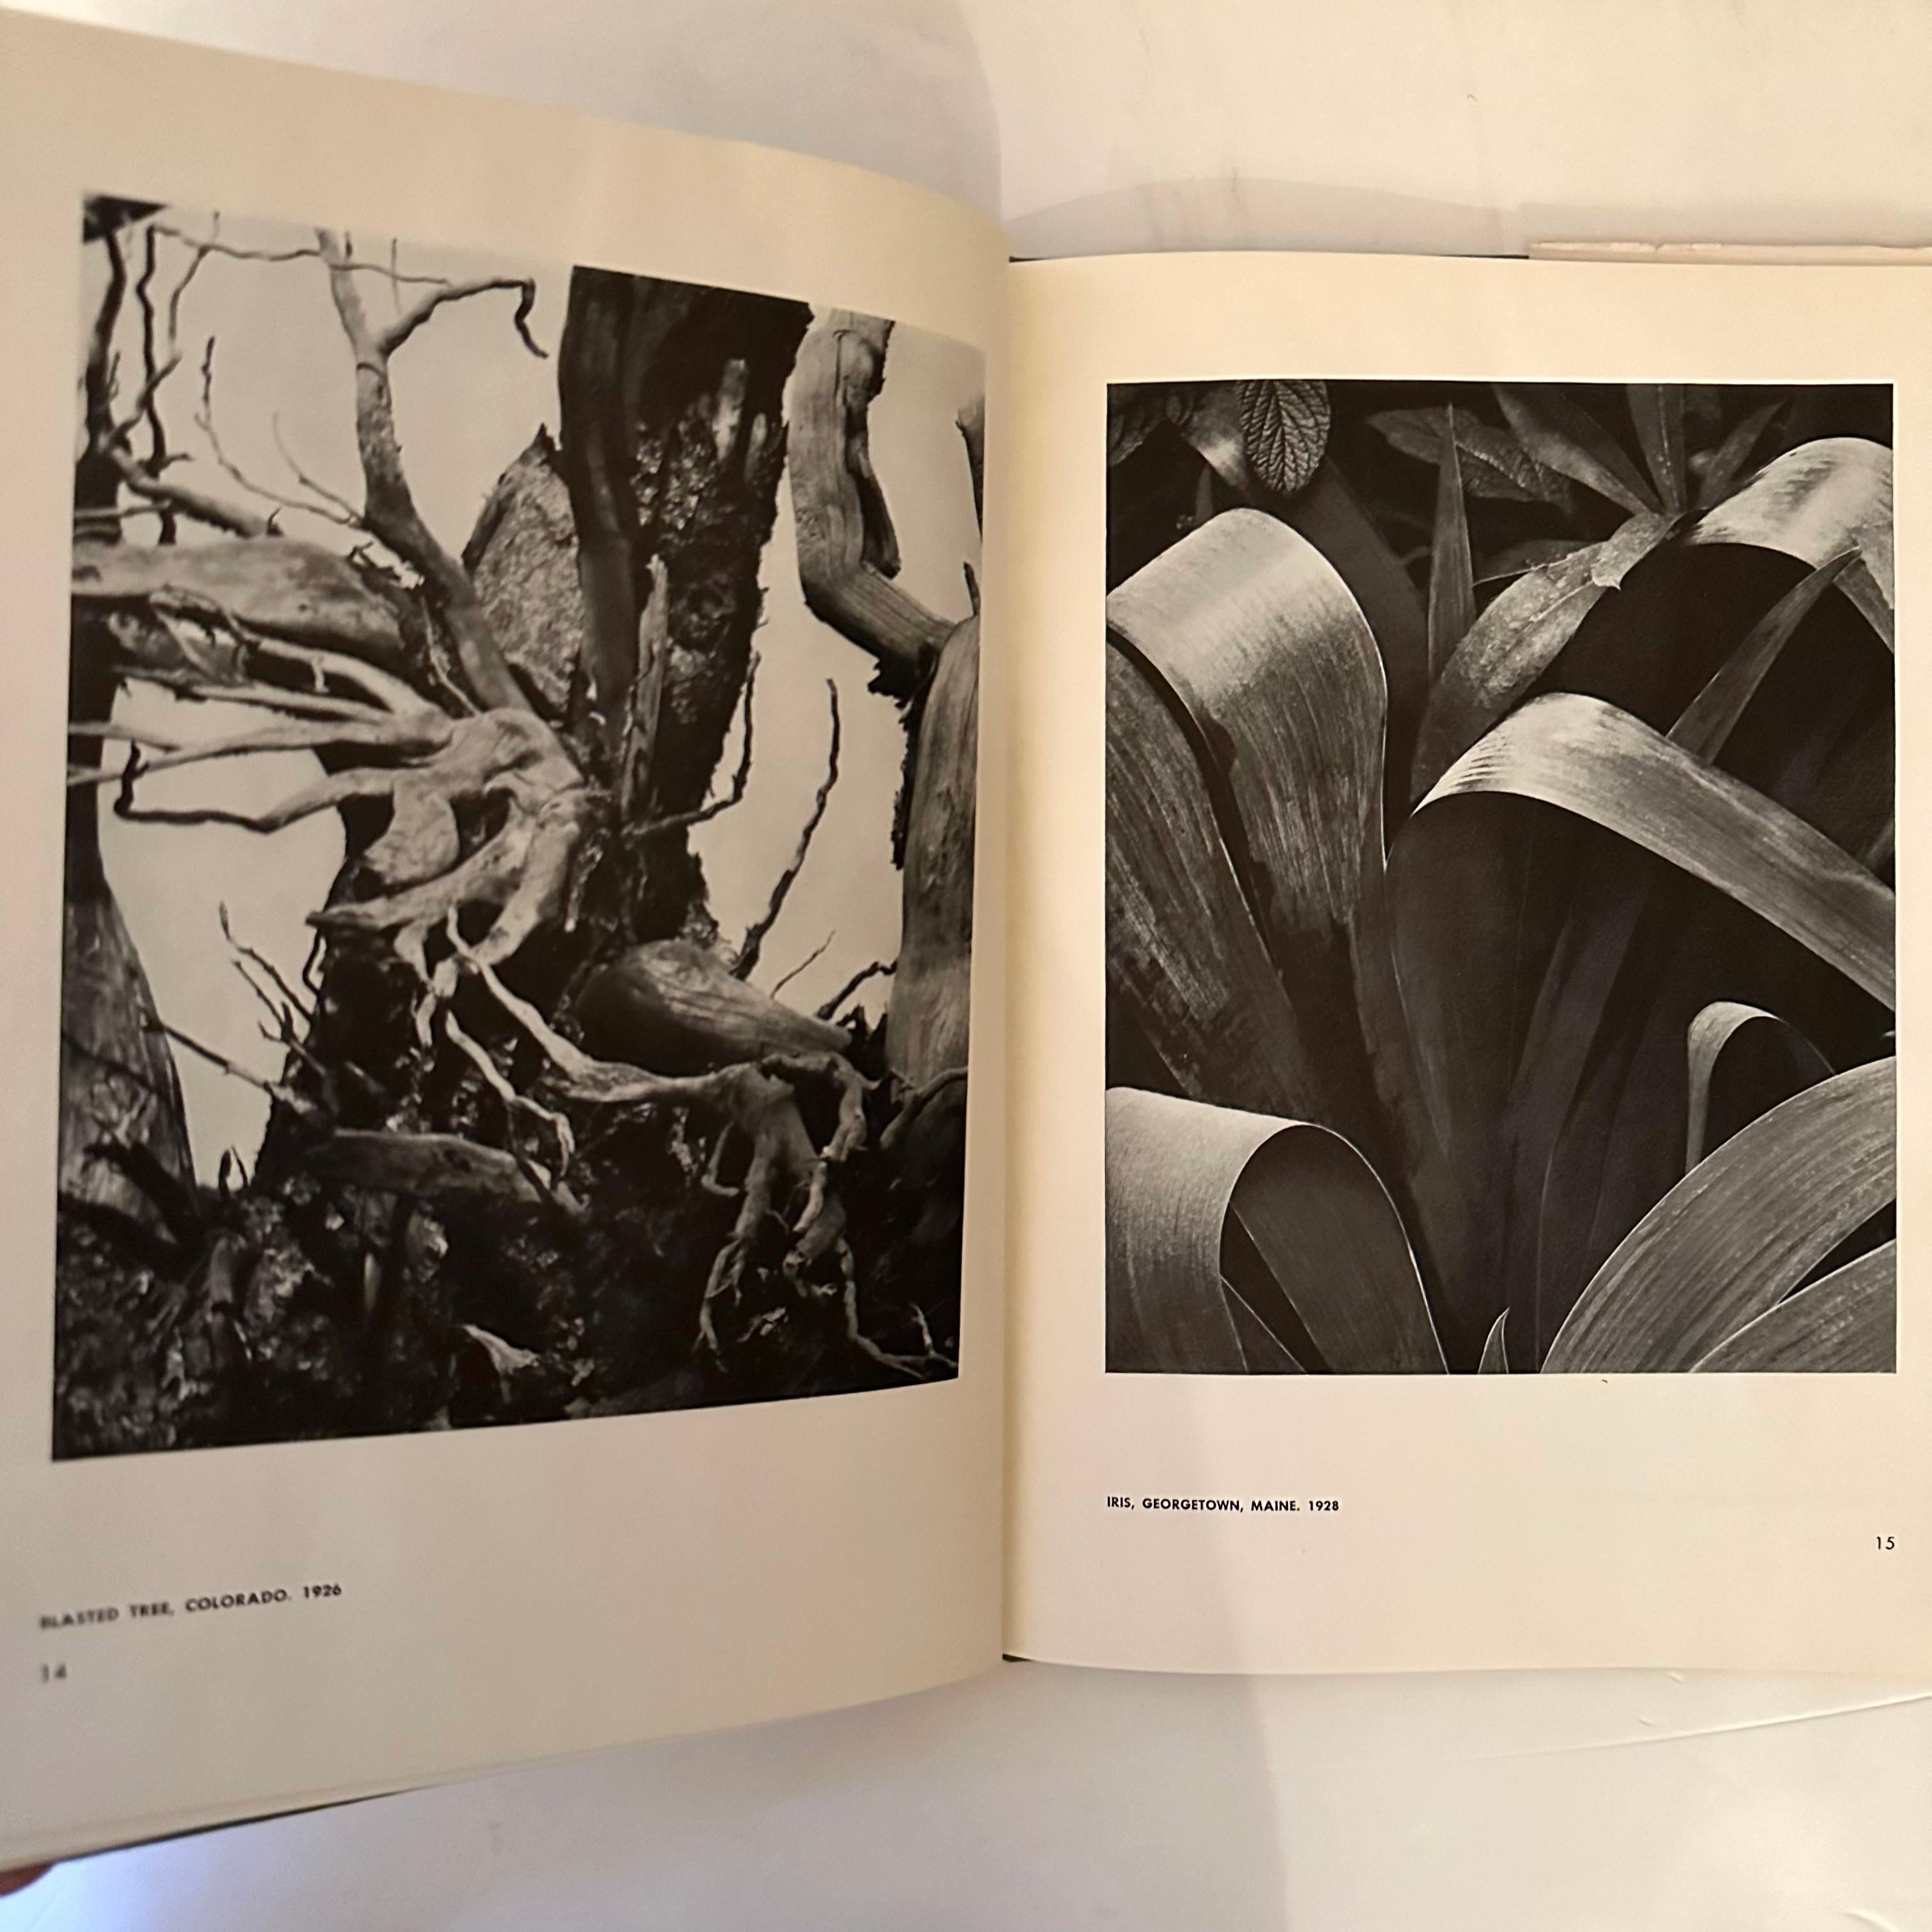 Published by the Museum of Modern Art, 1st edition, New York, 1945. Hardback, English text.

This exhibition catalogue is the first critical monograph issued by  MoMA on a photographer. It was published in conjunction with a planned series of